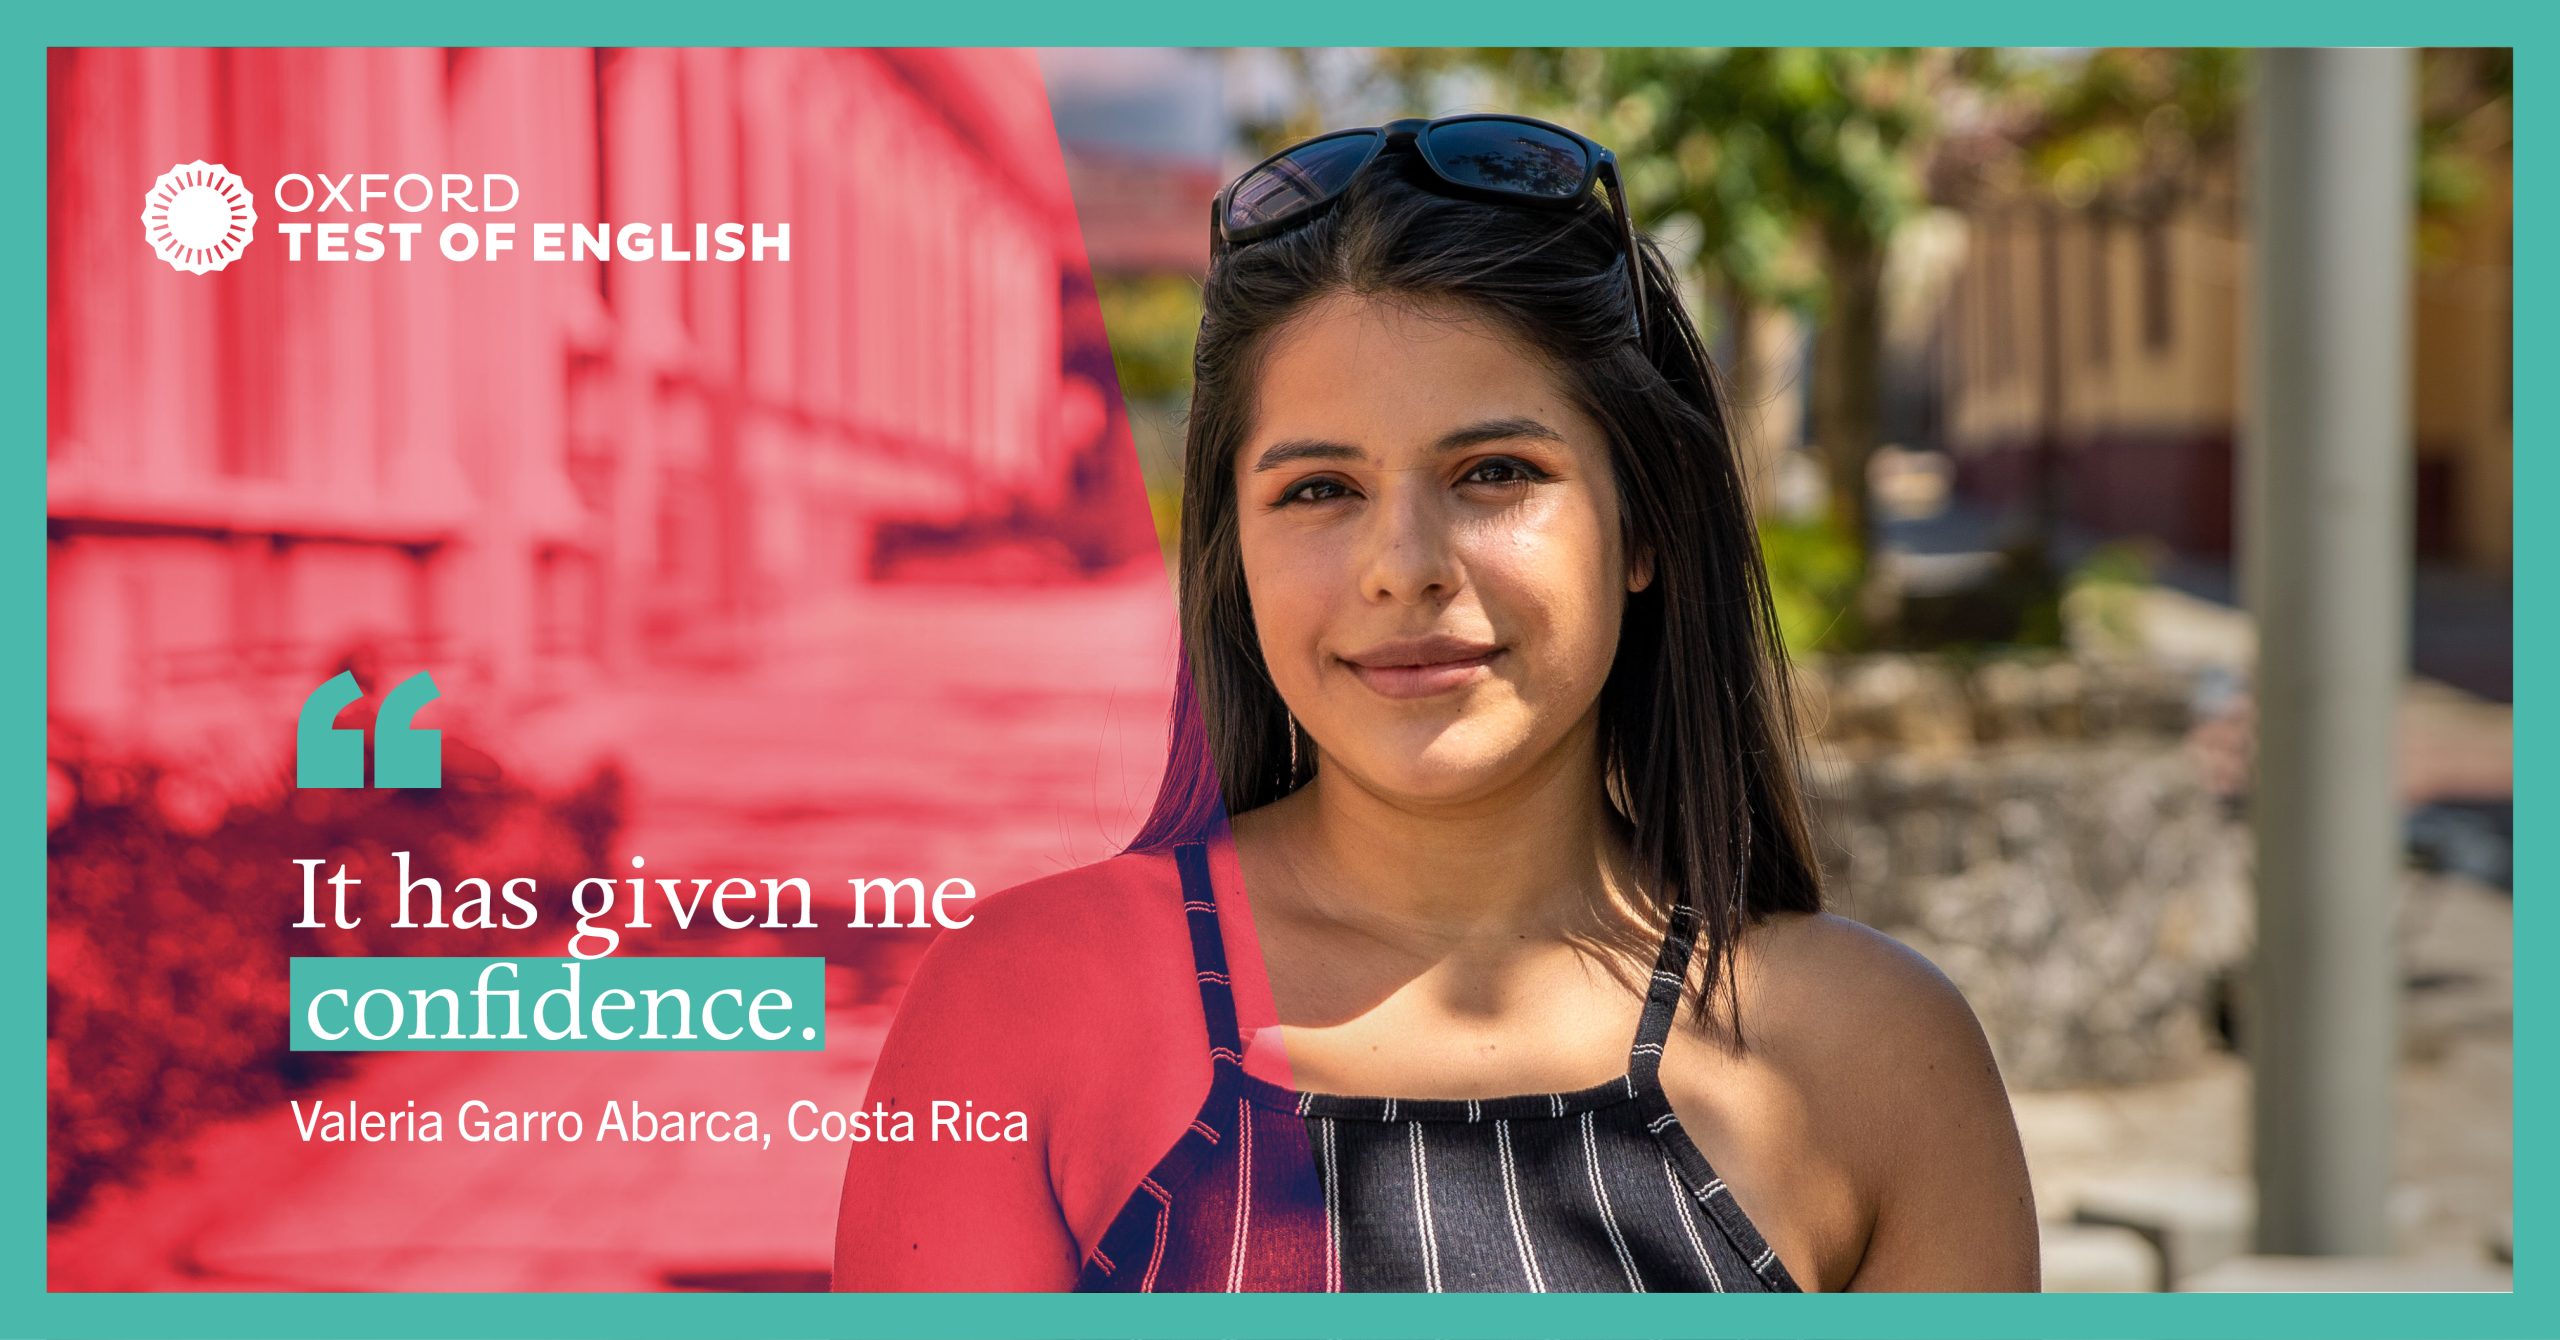 Valeria: "It has given me confidence."